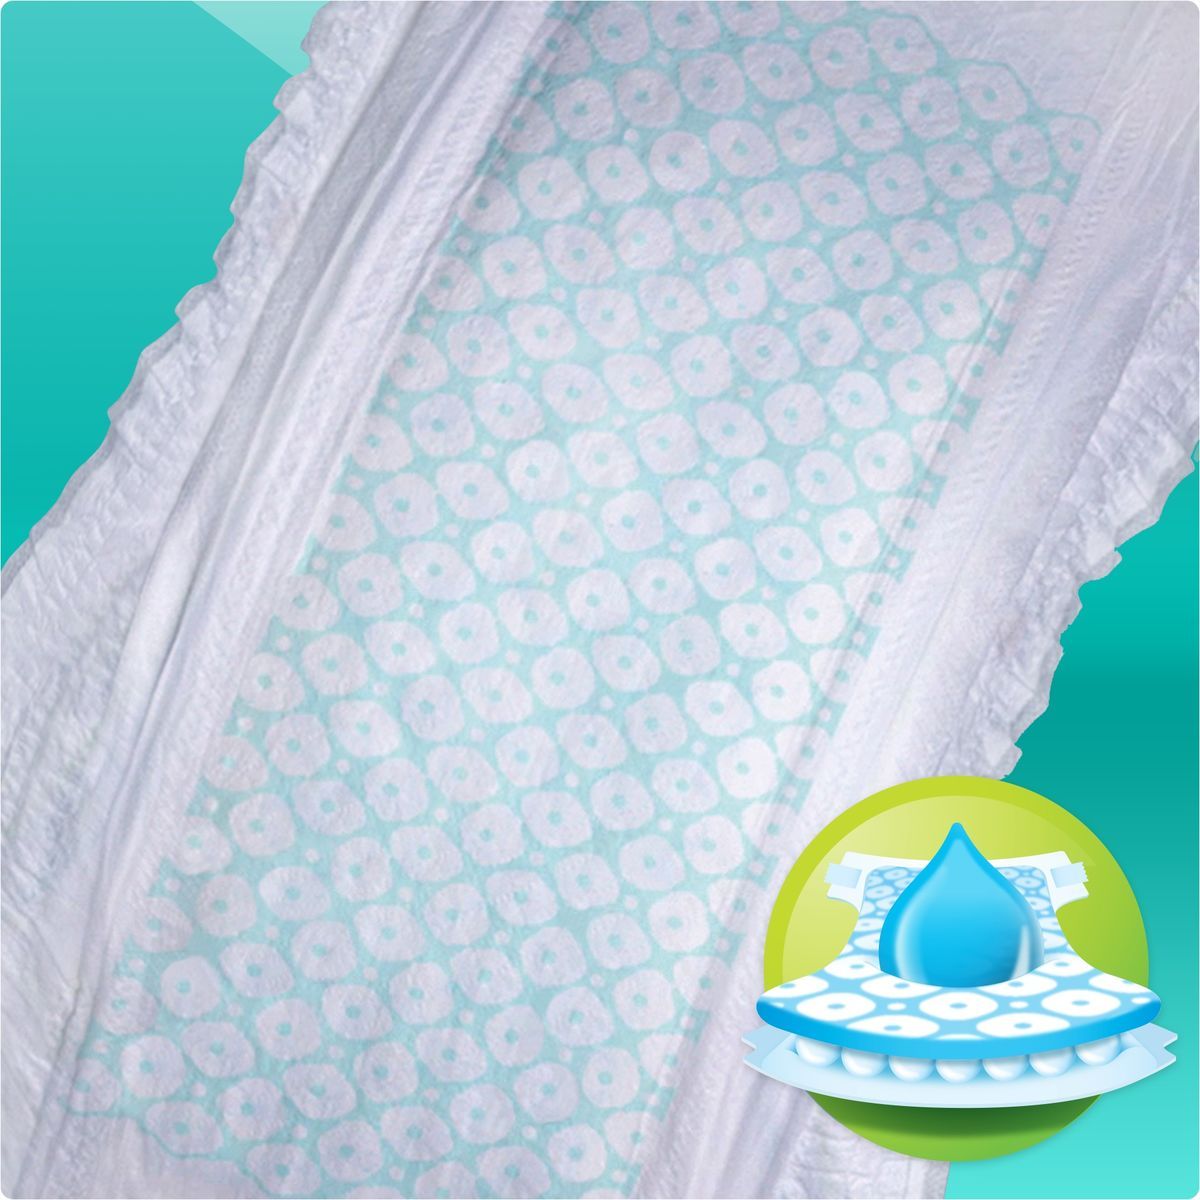 Pampers  Active Baby-Dry 11-16  ( 5) 110 